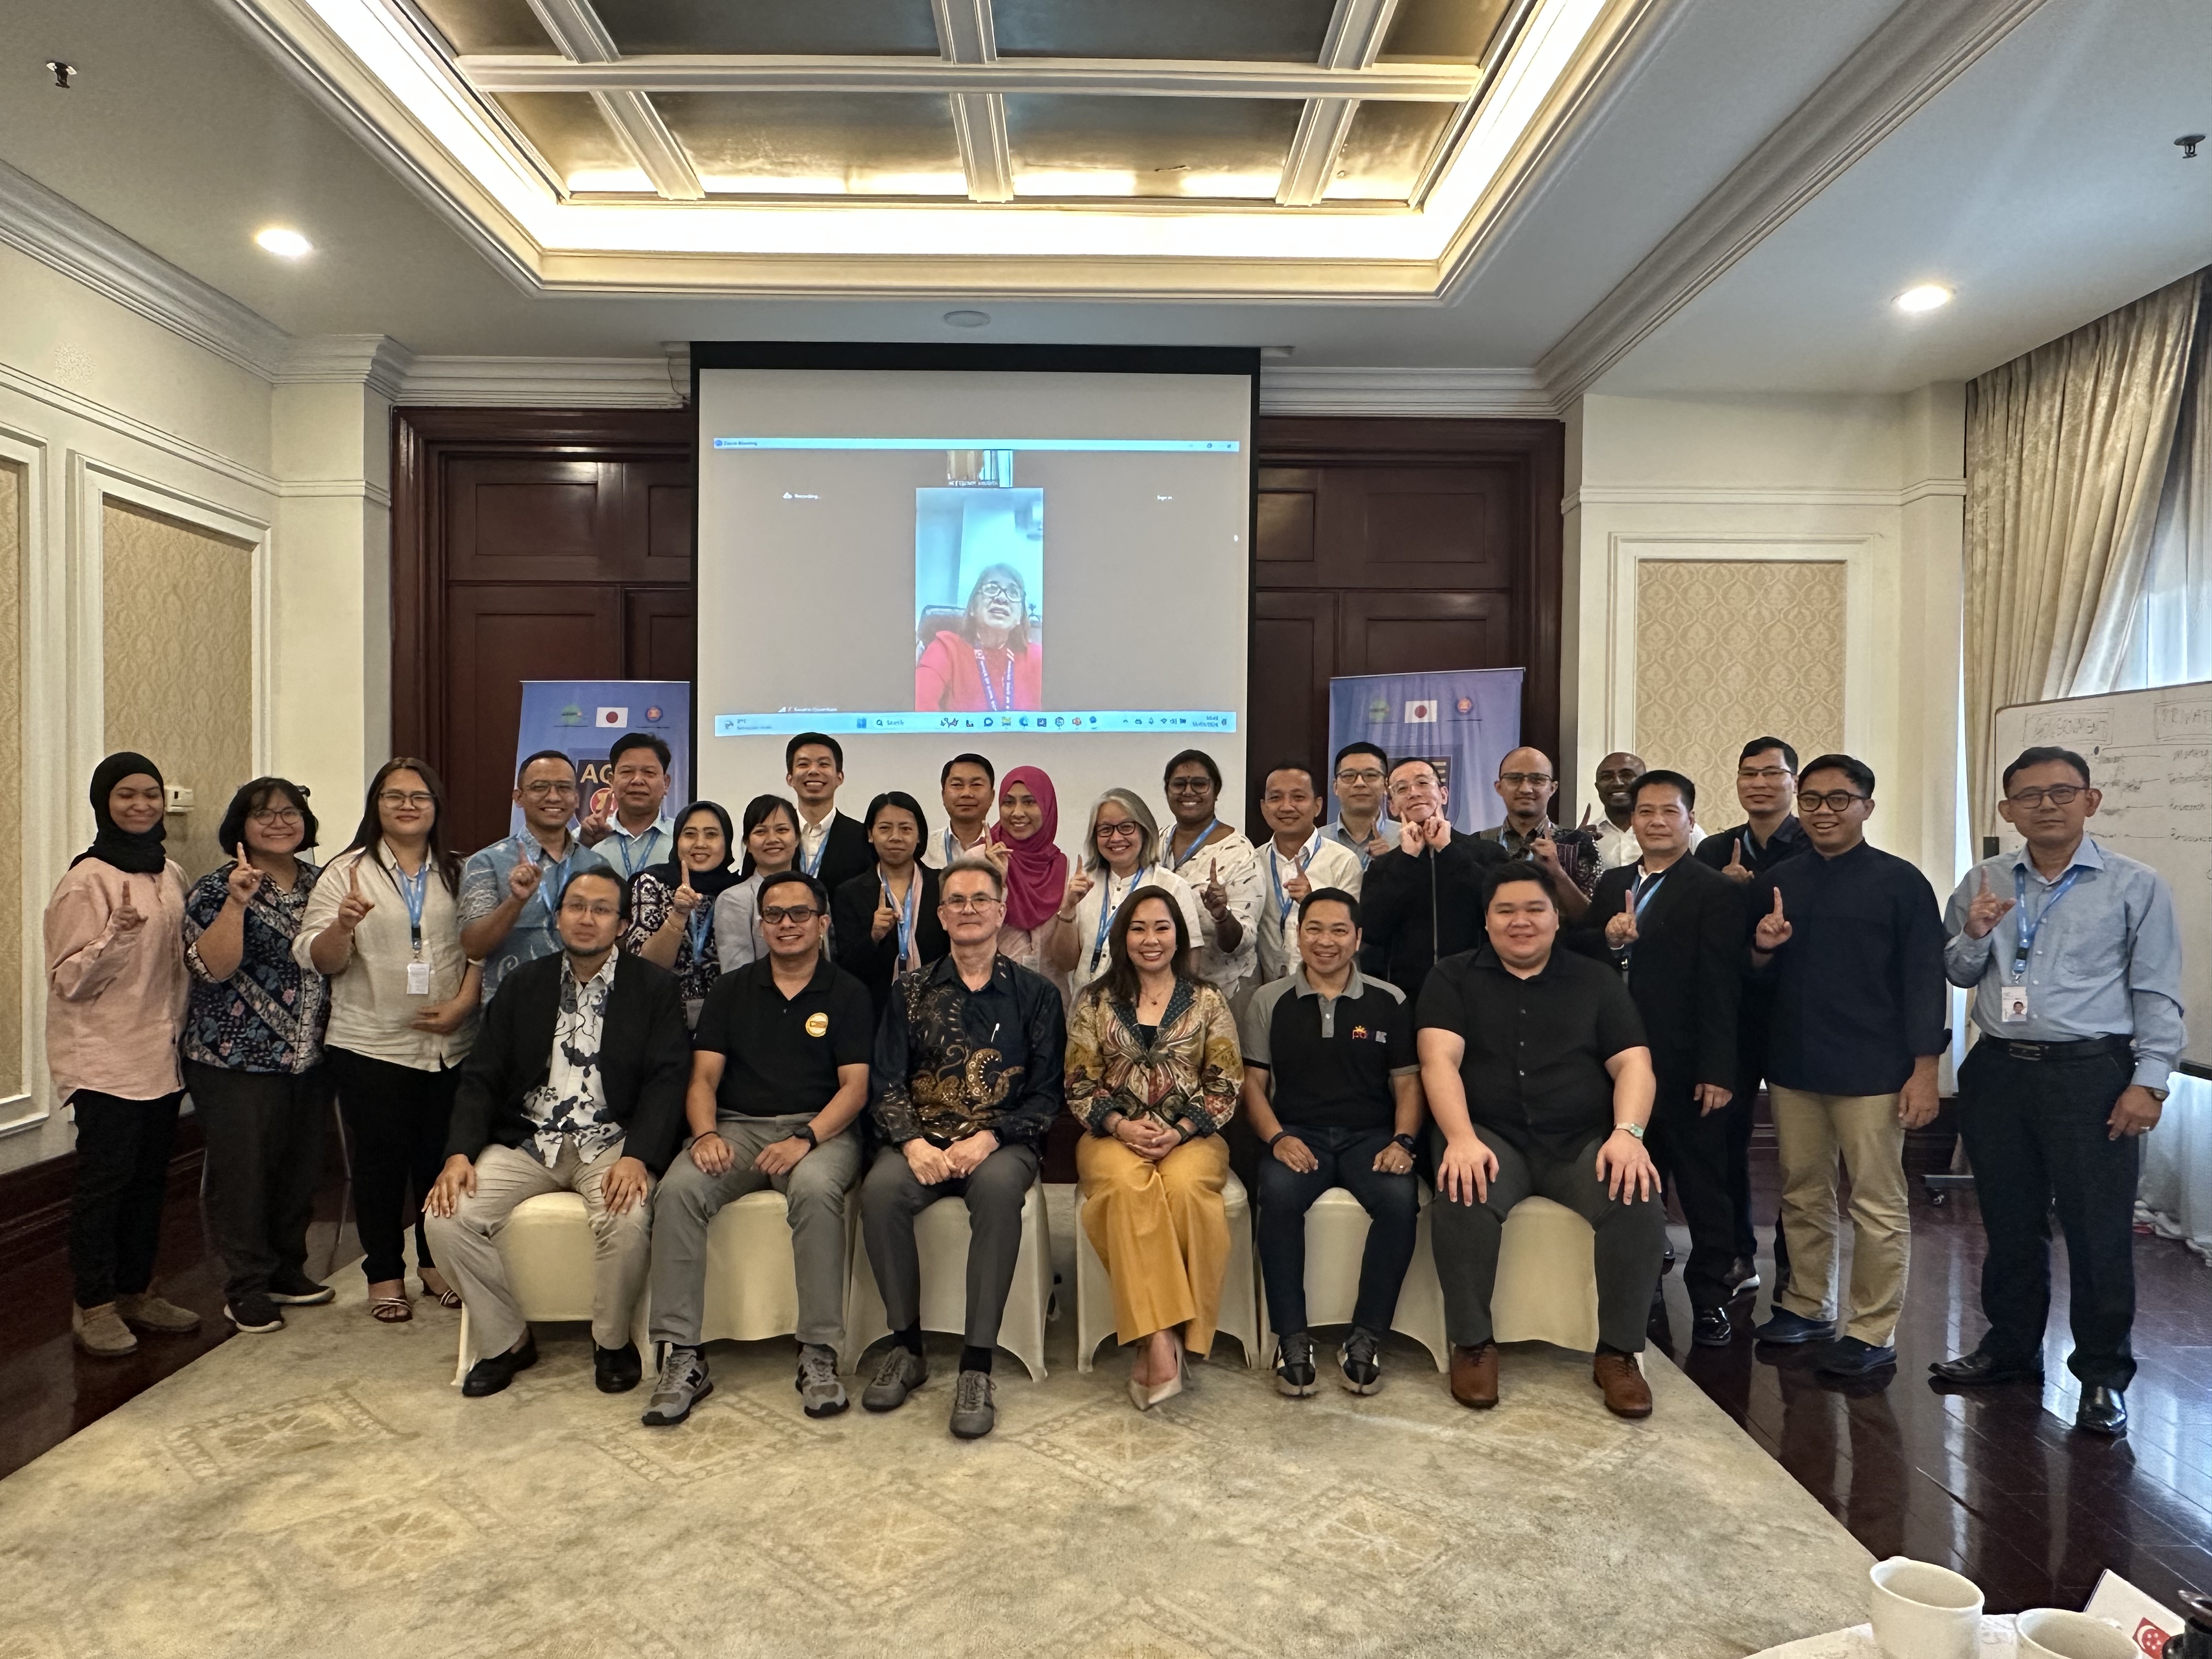 The organizers and participants of the PPP for DM course at the end of the workshop doing the "One ASEAN, One Response" pose.